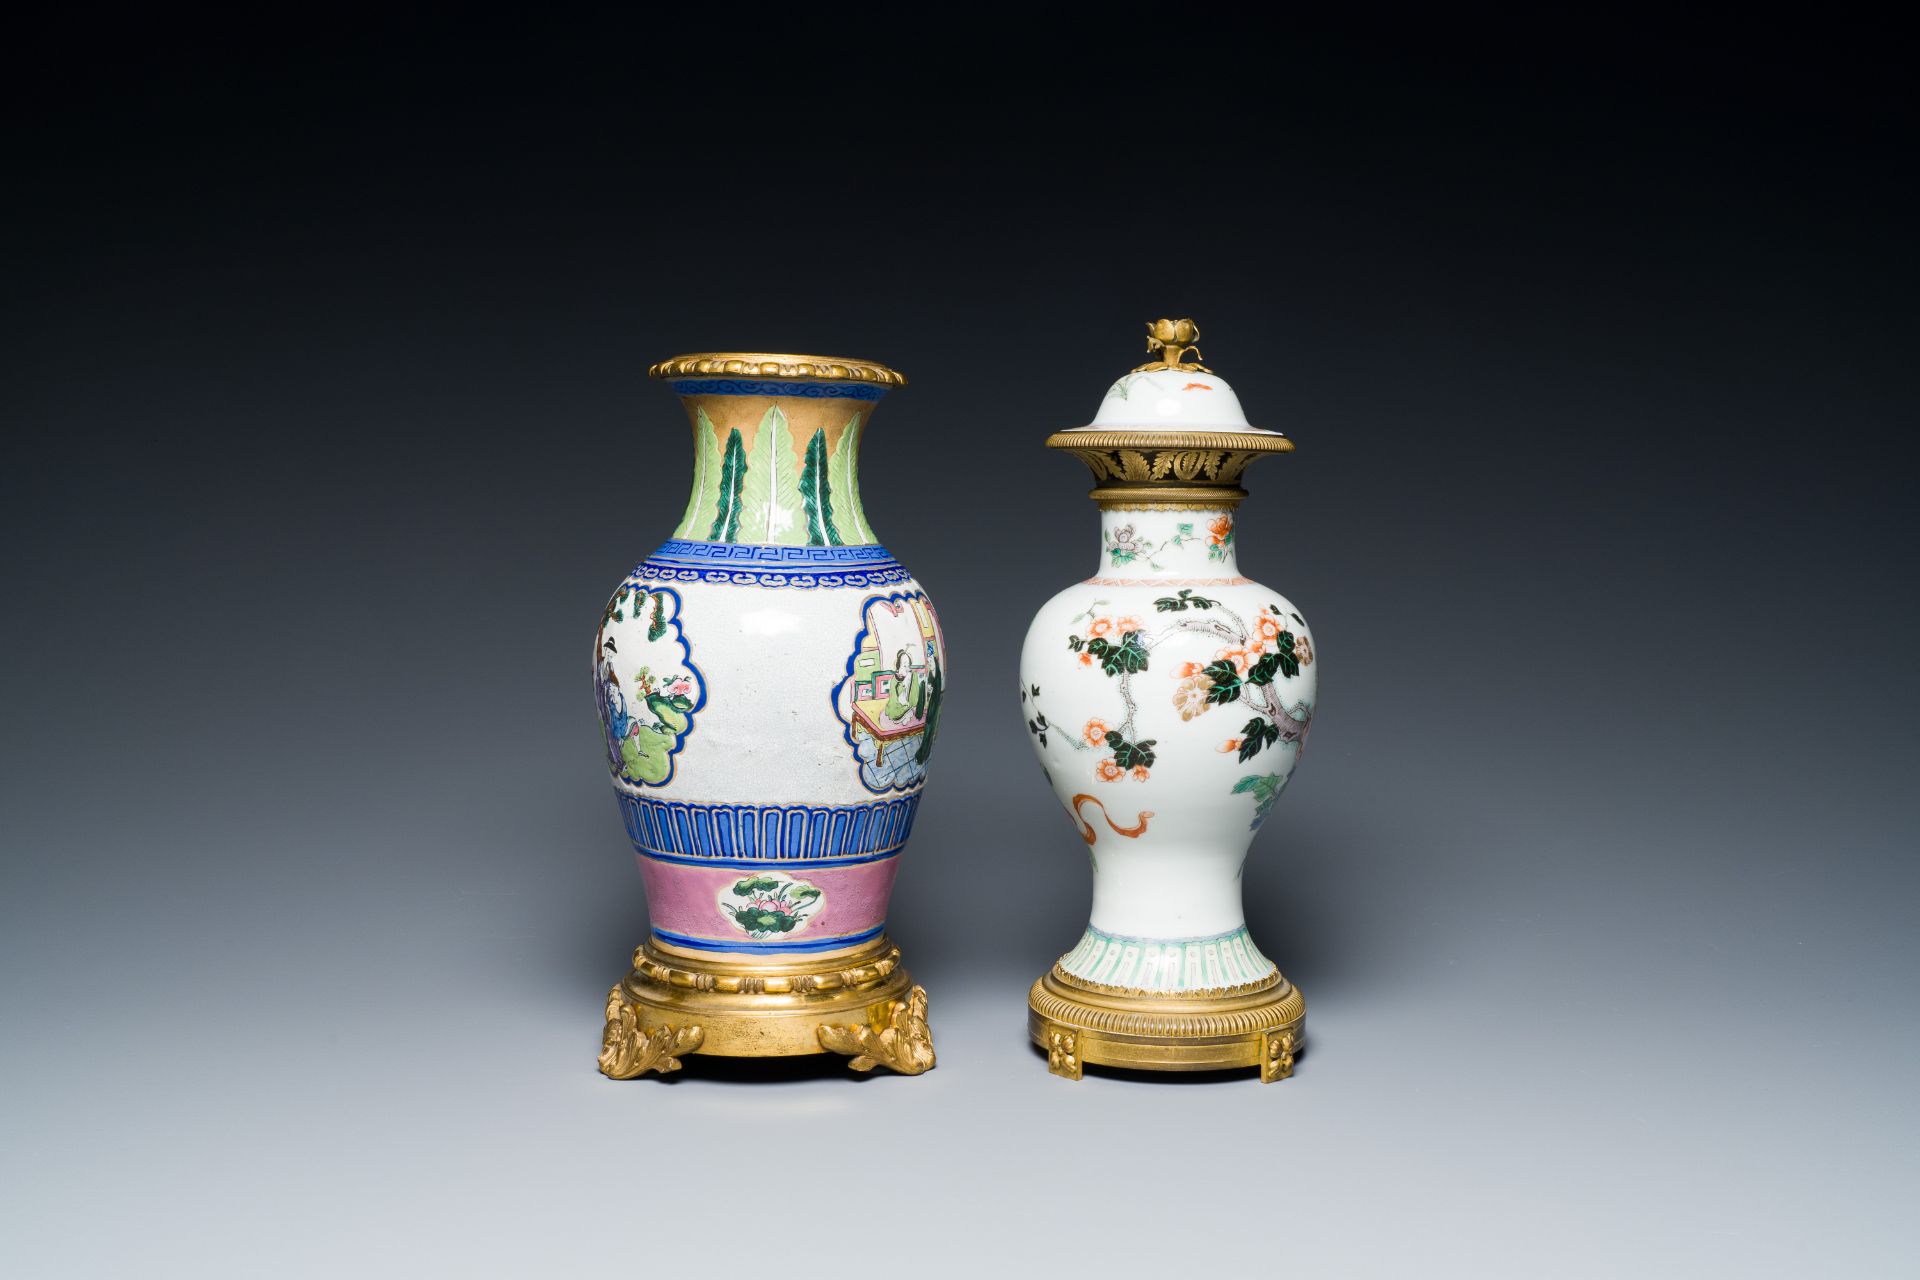 A Chinese famille verte vase and an enamelled Yixing stoneware vase with gilt bronze mounts, 19th C. - Image 3 of 6